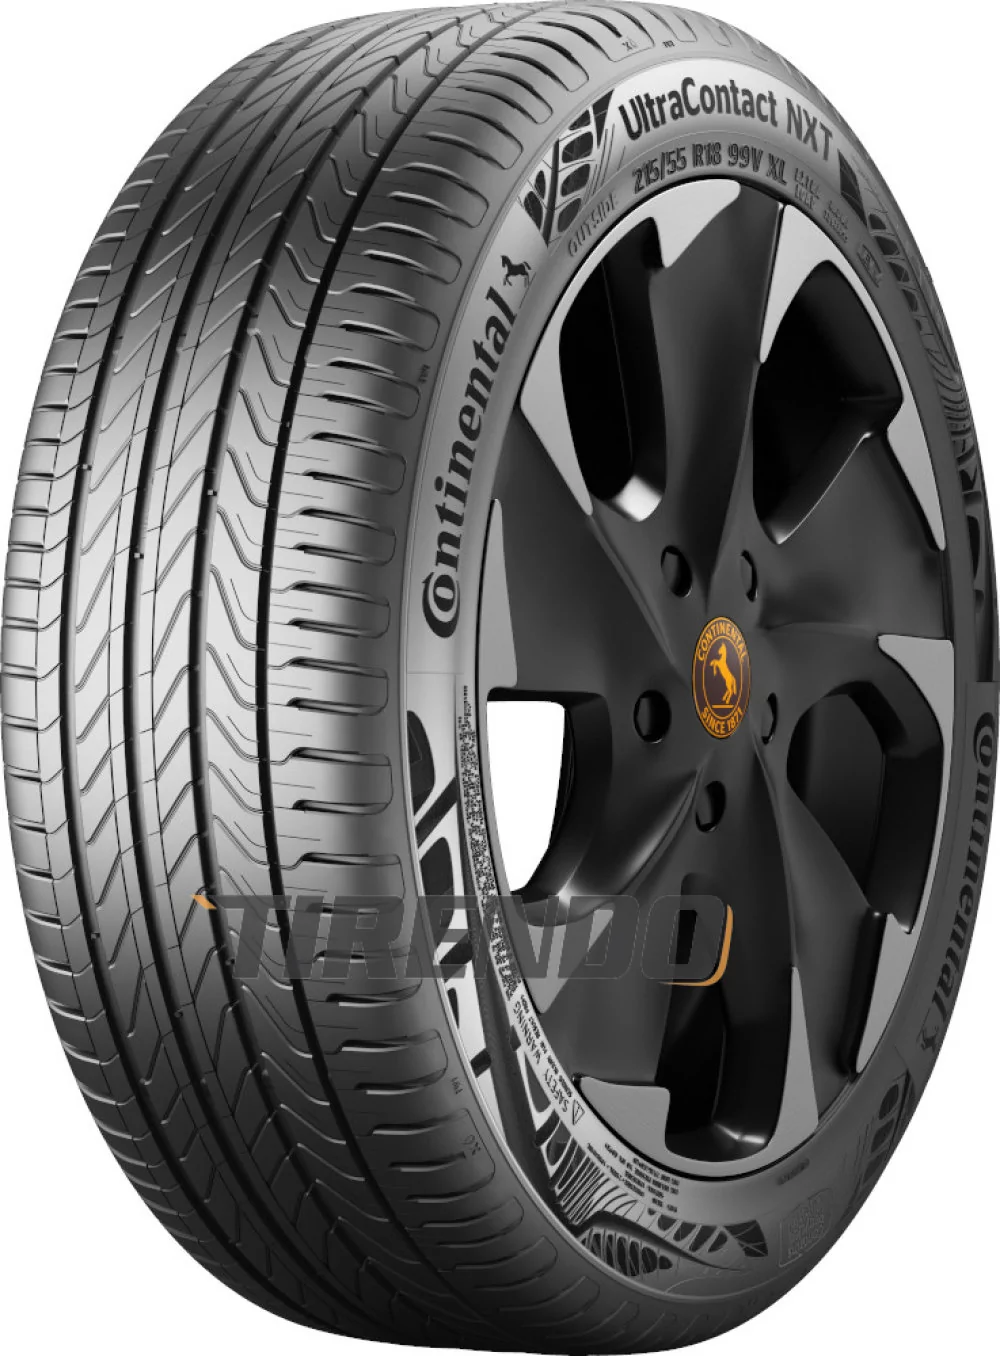 Continental UltraContact NXT - ContiRe.Tex 235/50R20 104T